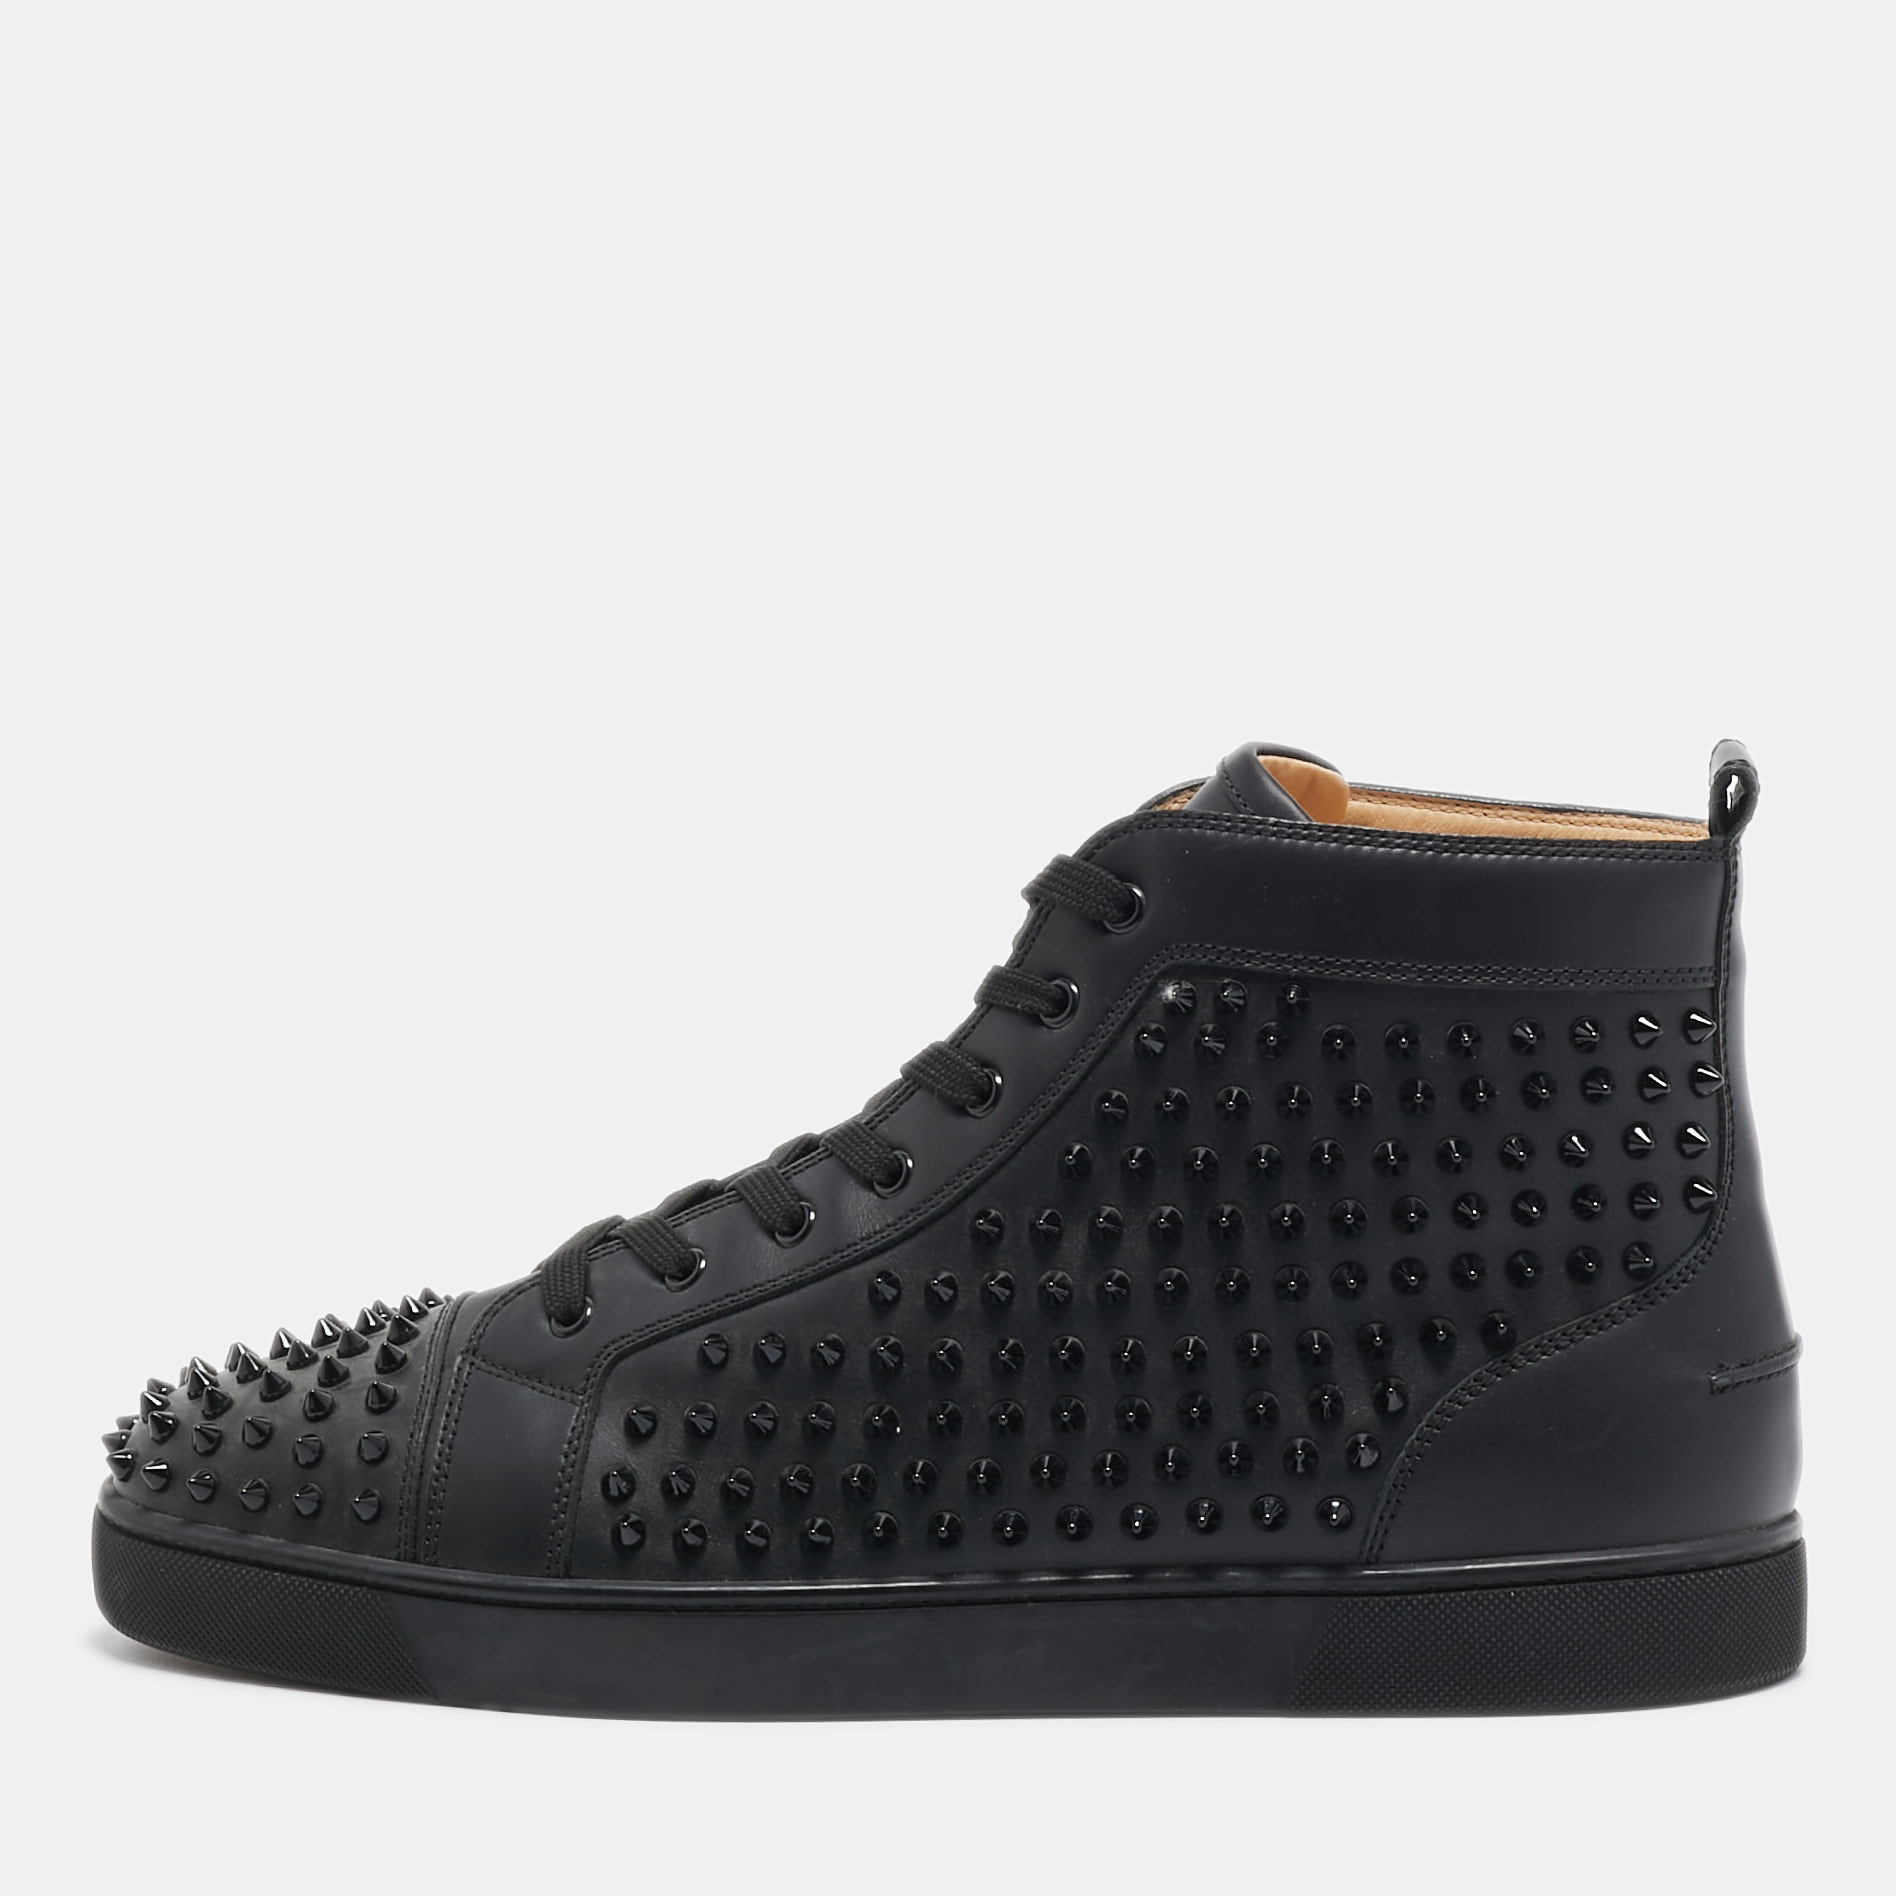 

Christian Louboutin Louis Black Leather Spike Cap Toe High Top Sneakers Size